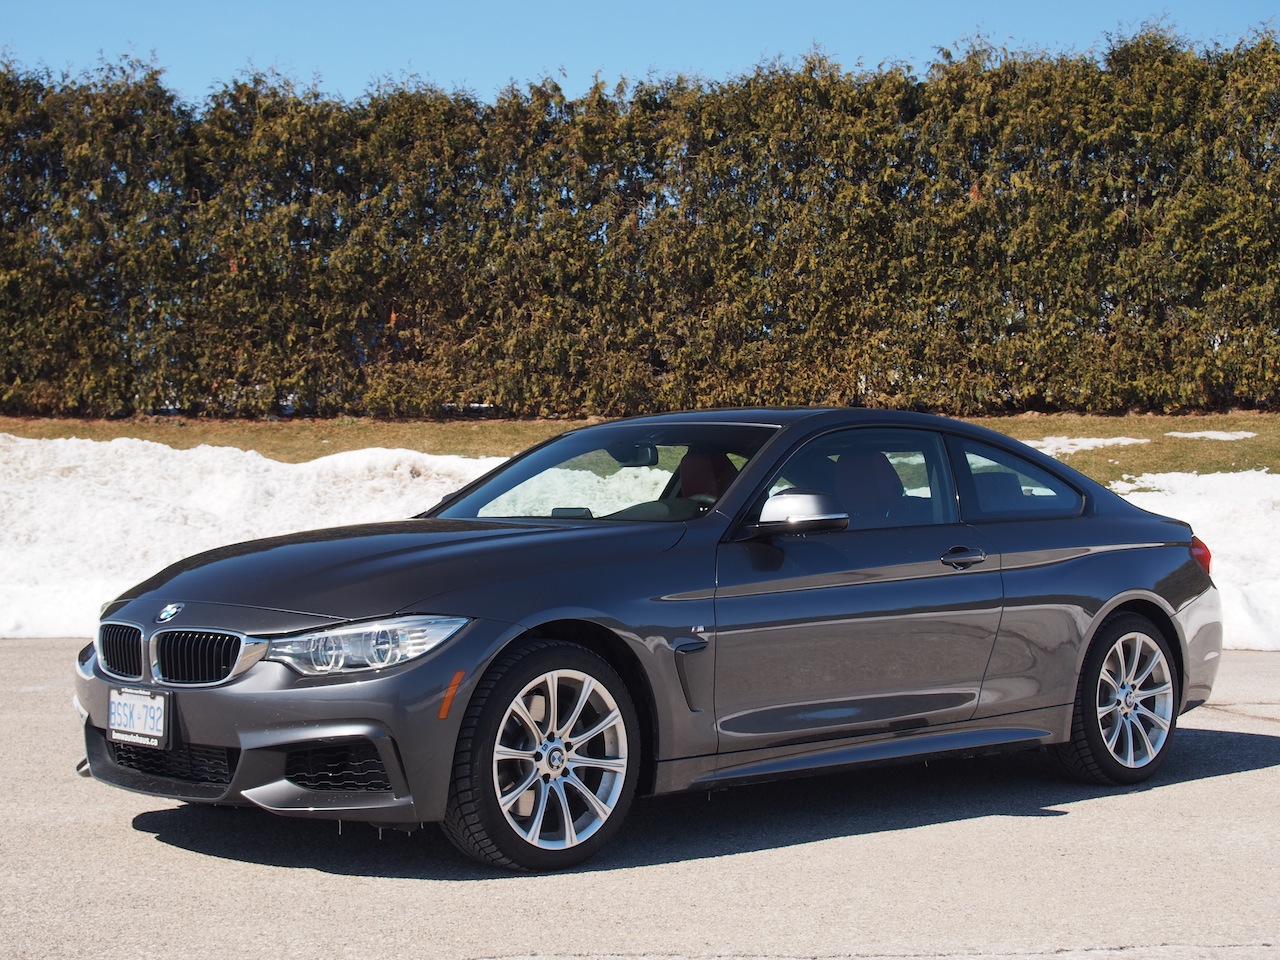 2014 BMW 435i xDrive Review - Cars, Photos, Test Drives, and Reviews |  Canadian Auto Review